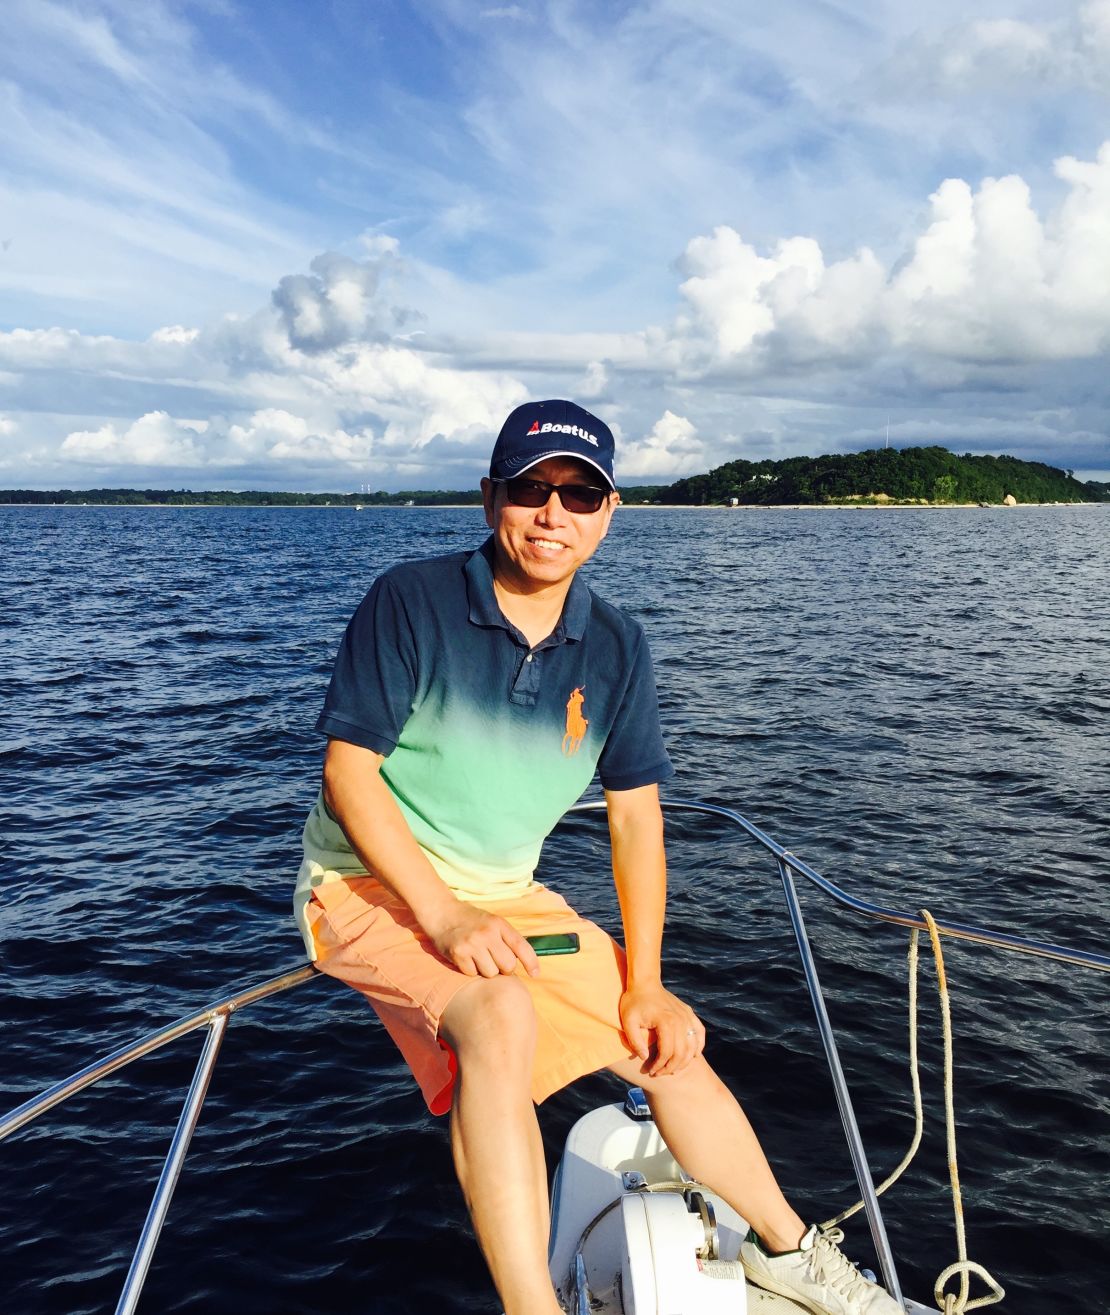 Kai Li in 2015 off the Long Island Sound, New York. Born in Shanghai, Li emigrated to the US in 1989 and became an American citizen.